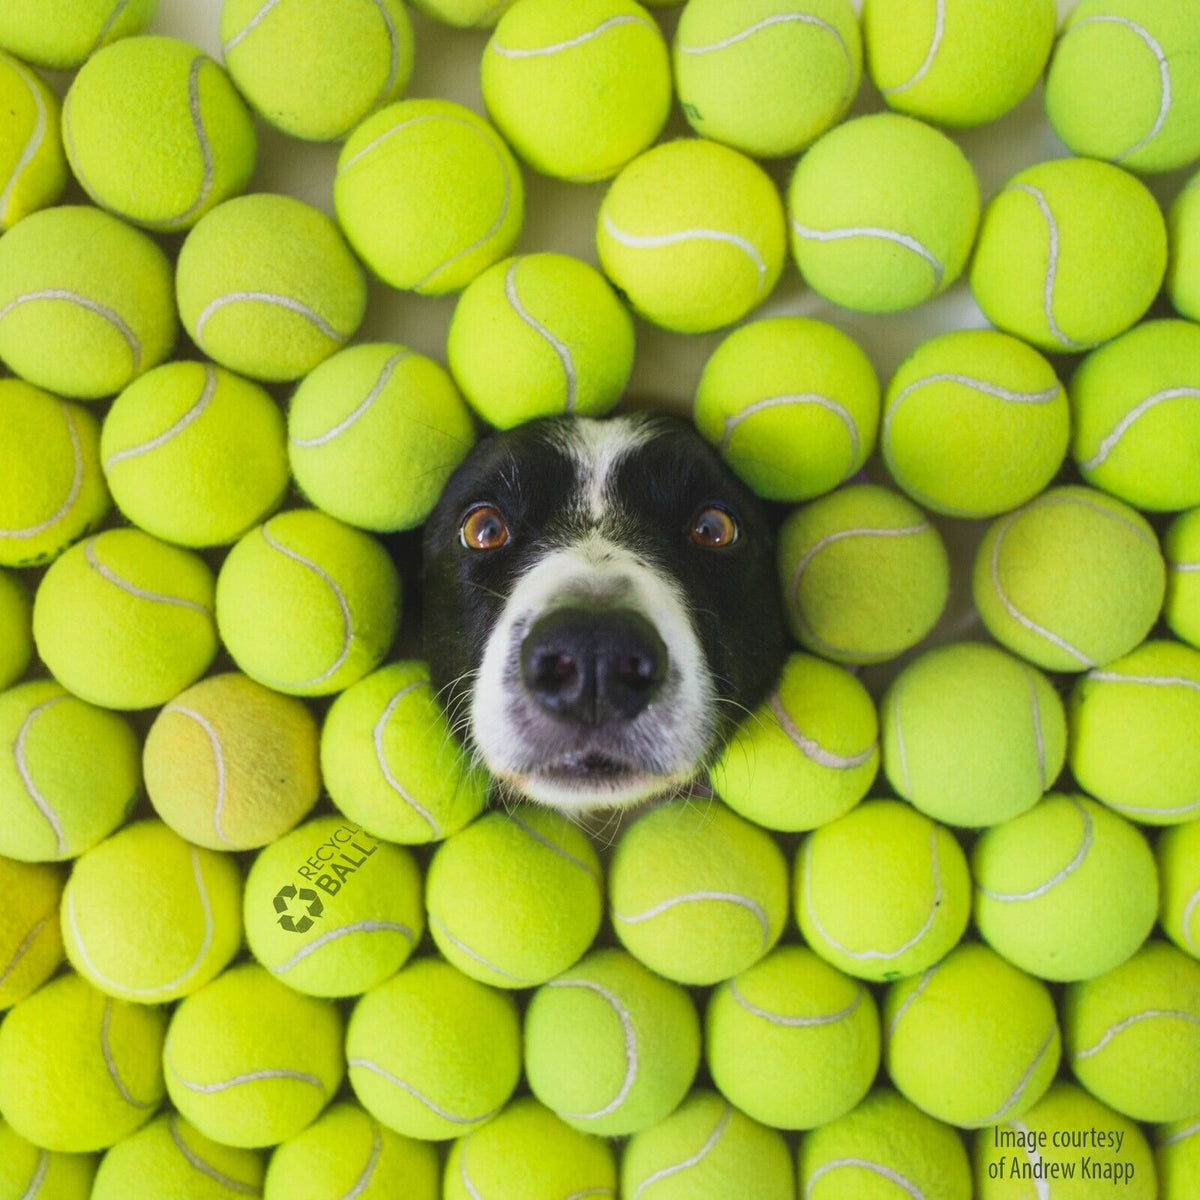 4 6 8 10 Branded Balls Ball Games/Dogs Used Tennis Balls EXCELLENT CONDITION 